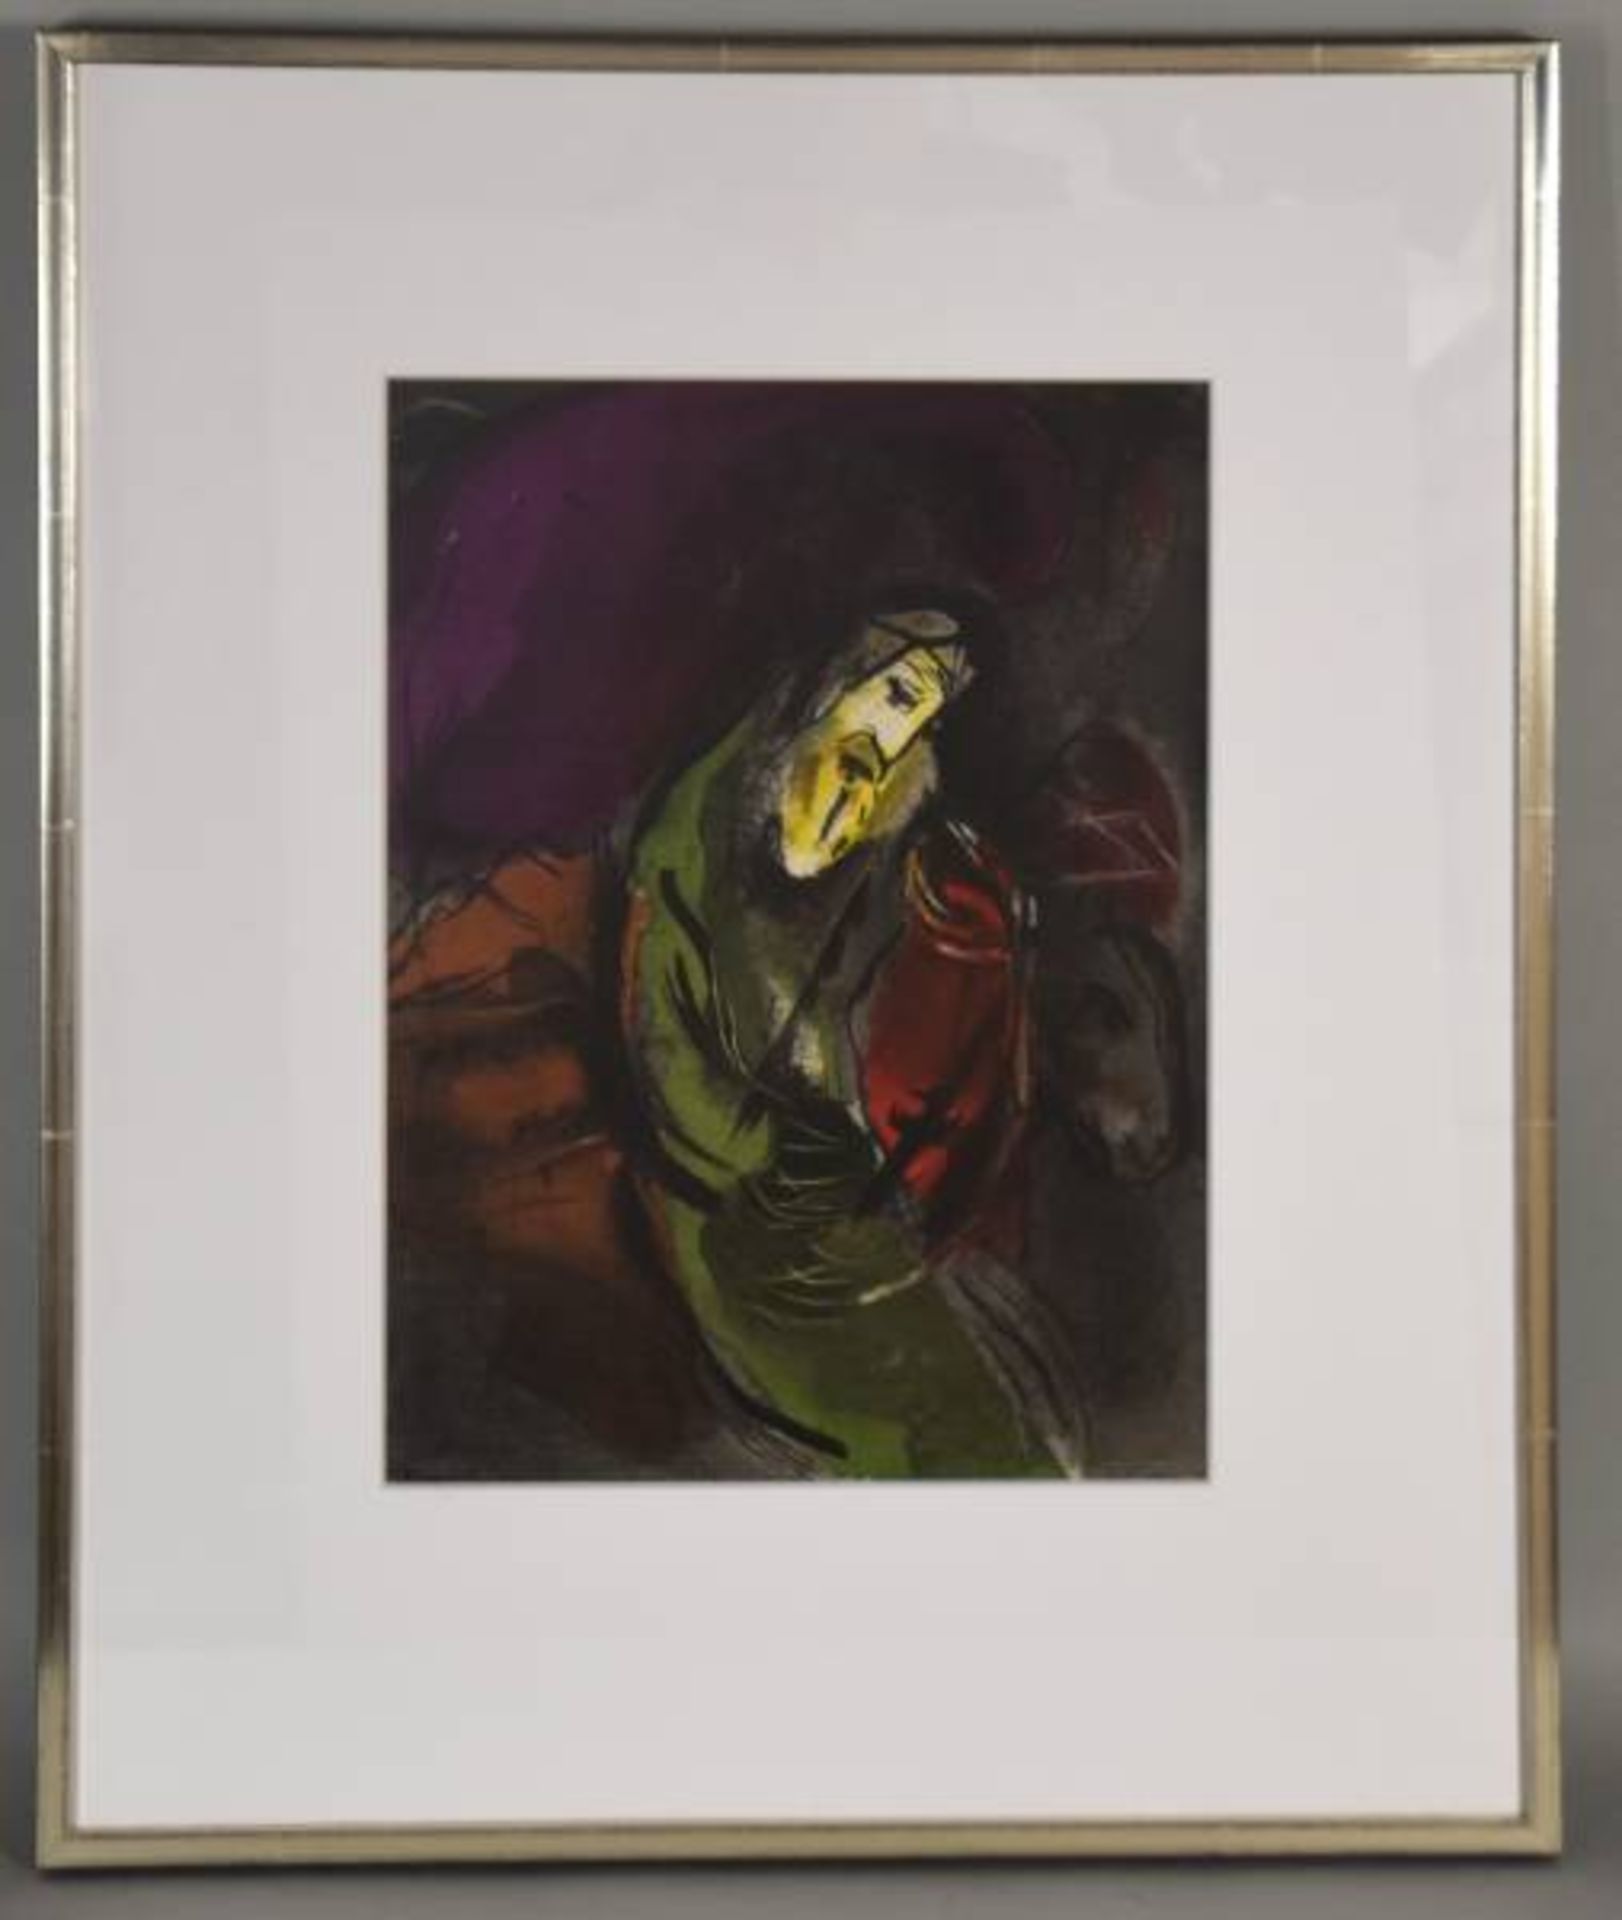 CHAGALL Marc (1887 Witebsk 1985 Saint Paul de Vence) "Hiob", Farblithographie, 35x25cm, PP, RCHAGALL - Image 2 of 2